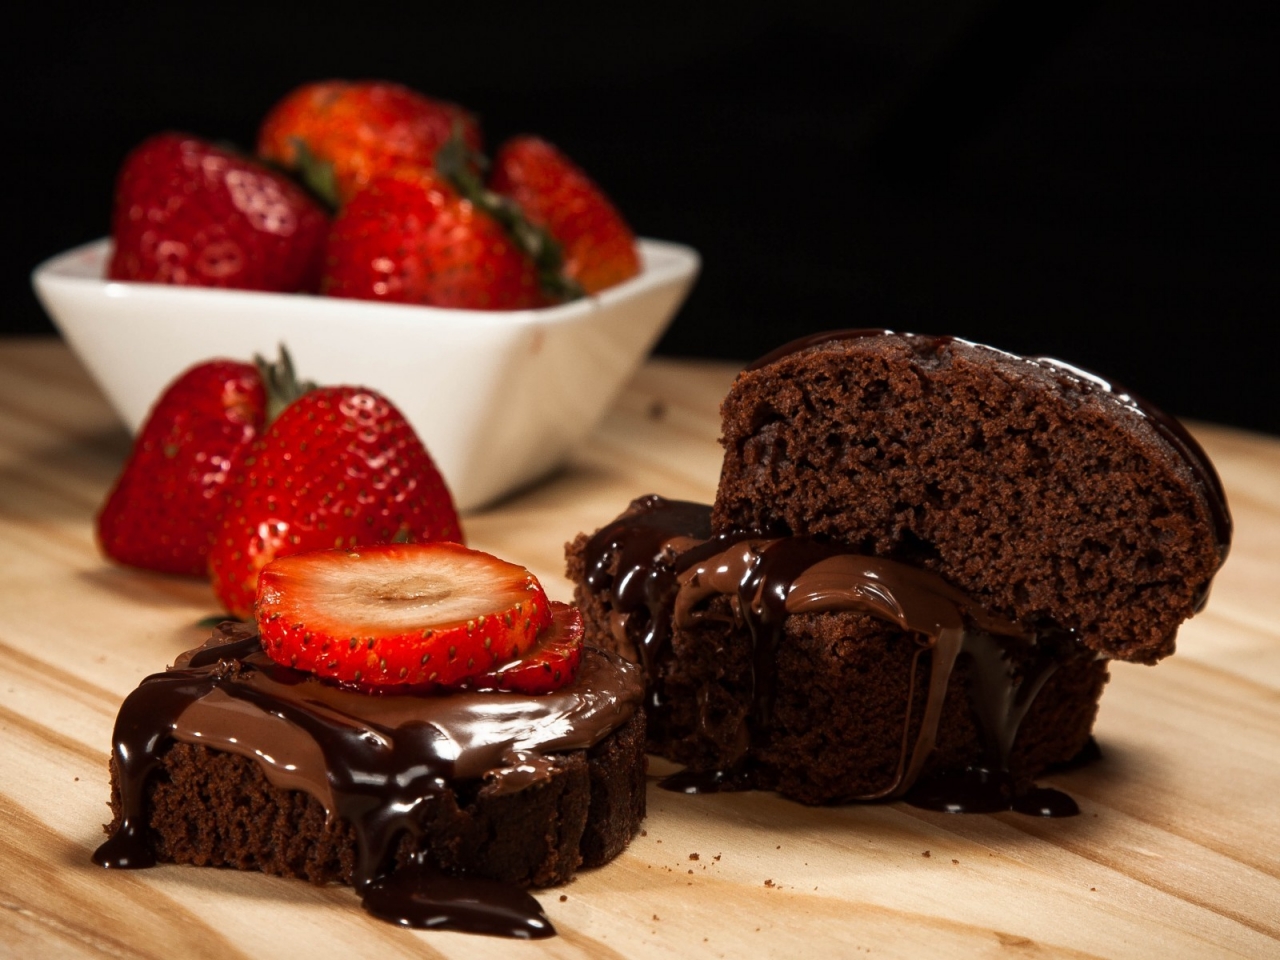 Chocolate and Strawberry Cake for 1280 x 960 resolution